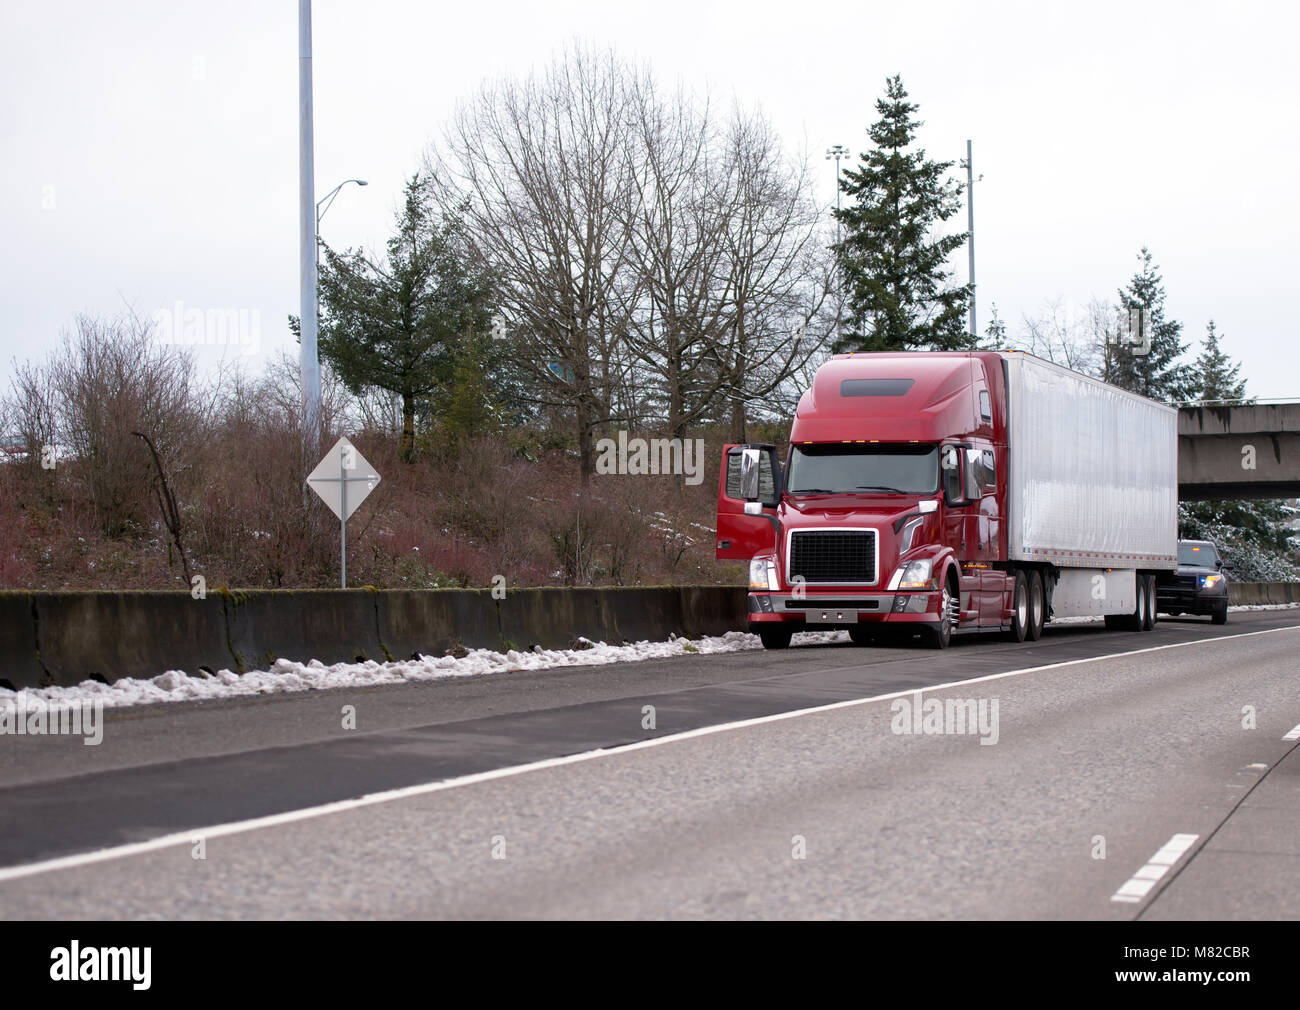 Road patrol police officer checks stopped long-haul red modern big rig semi truck with reefer semi trailer on winter straight interstate multiline hig Stock Photo